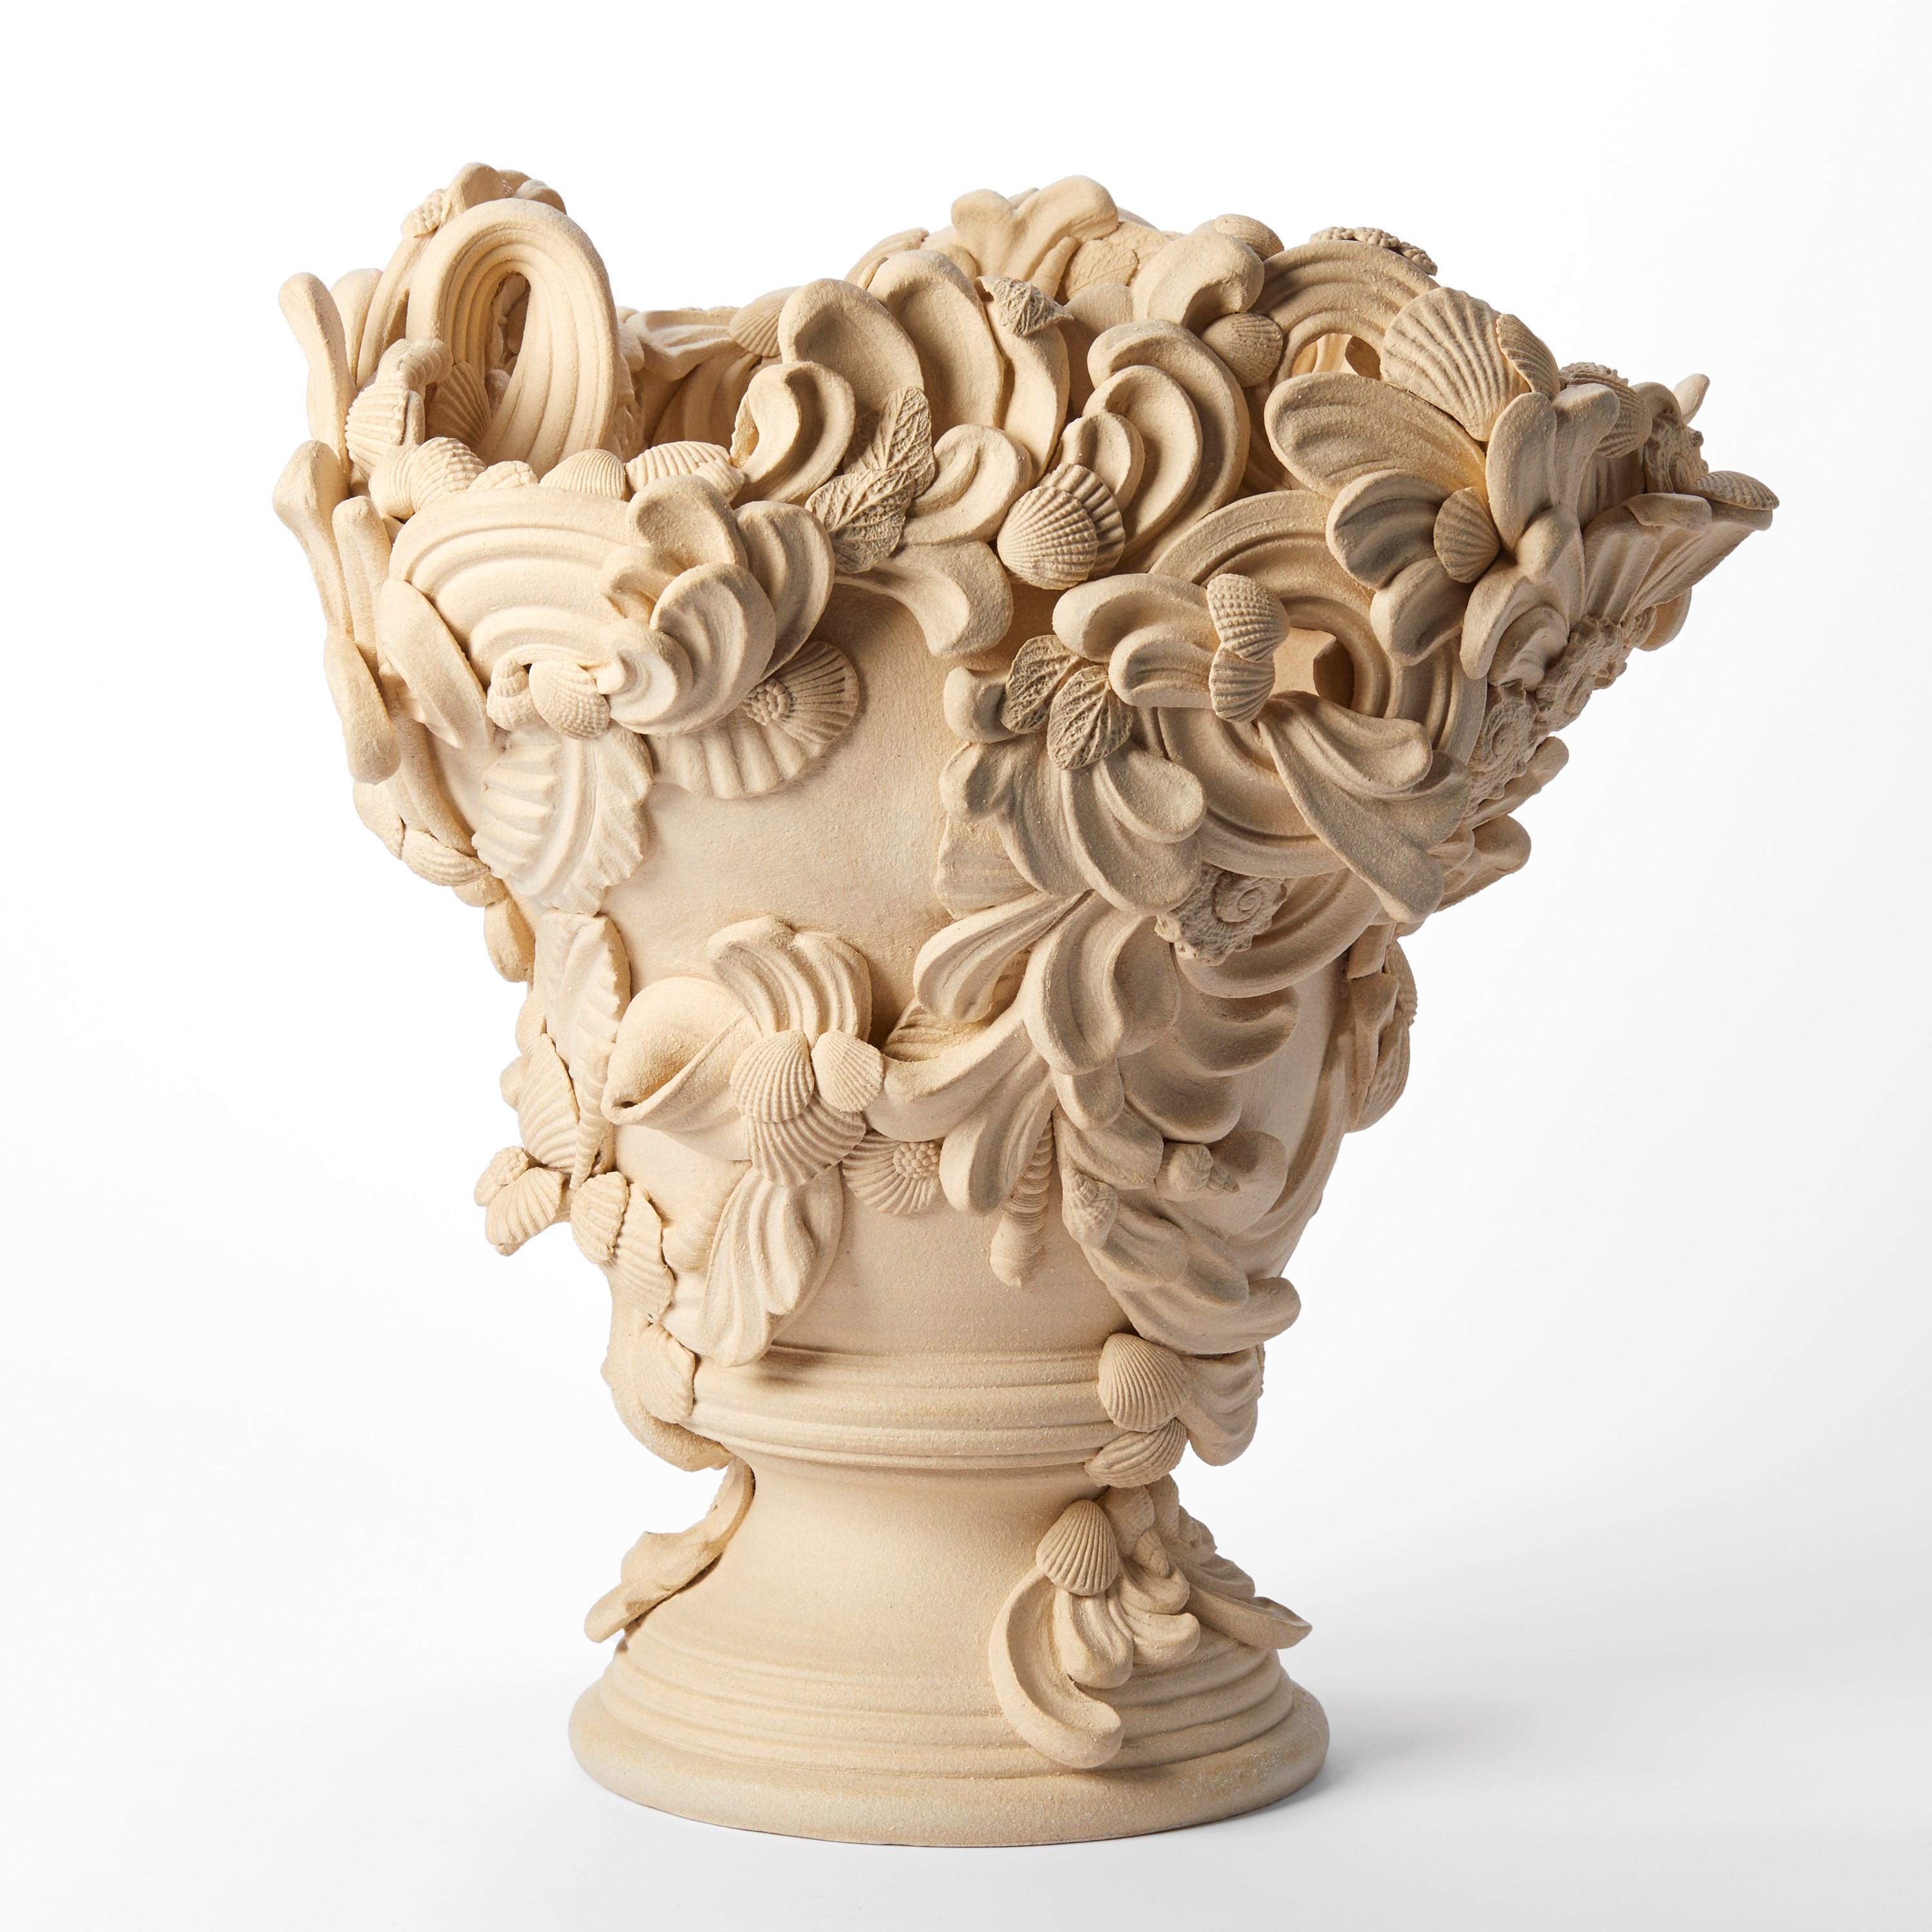 'Abundance II'  is a unique ceramic sculpture by the British artist, Jo Taylor.

Taylor’s inspiration comes from highly decorative architectural features such as ornate plaster ceilings, wrought iron and carved stone. Living near the Georgian city